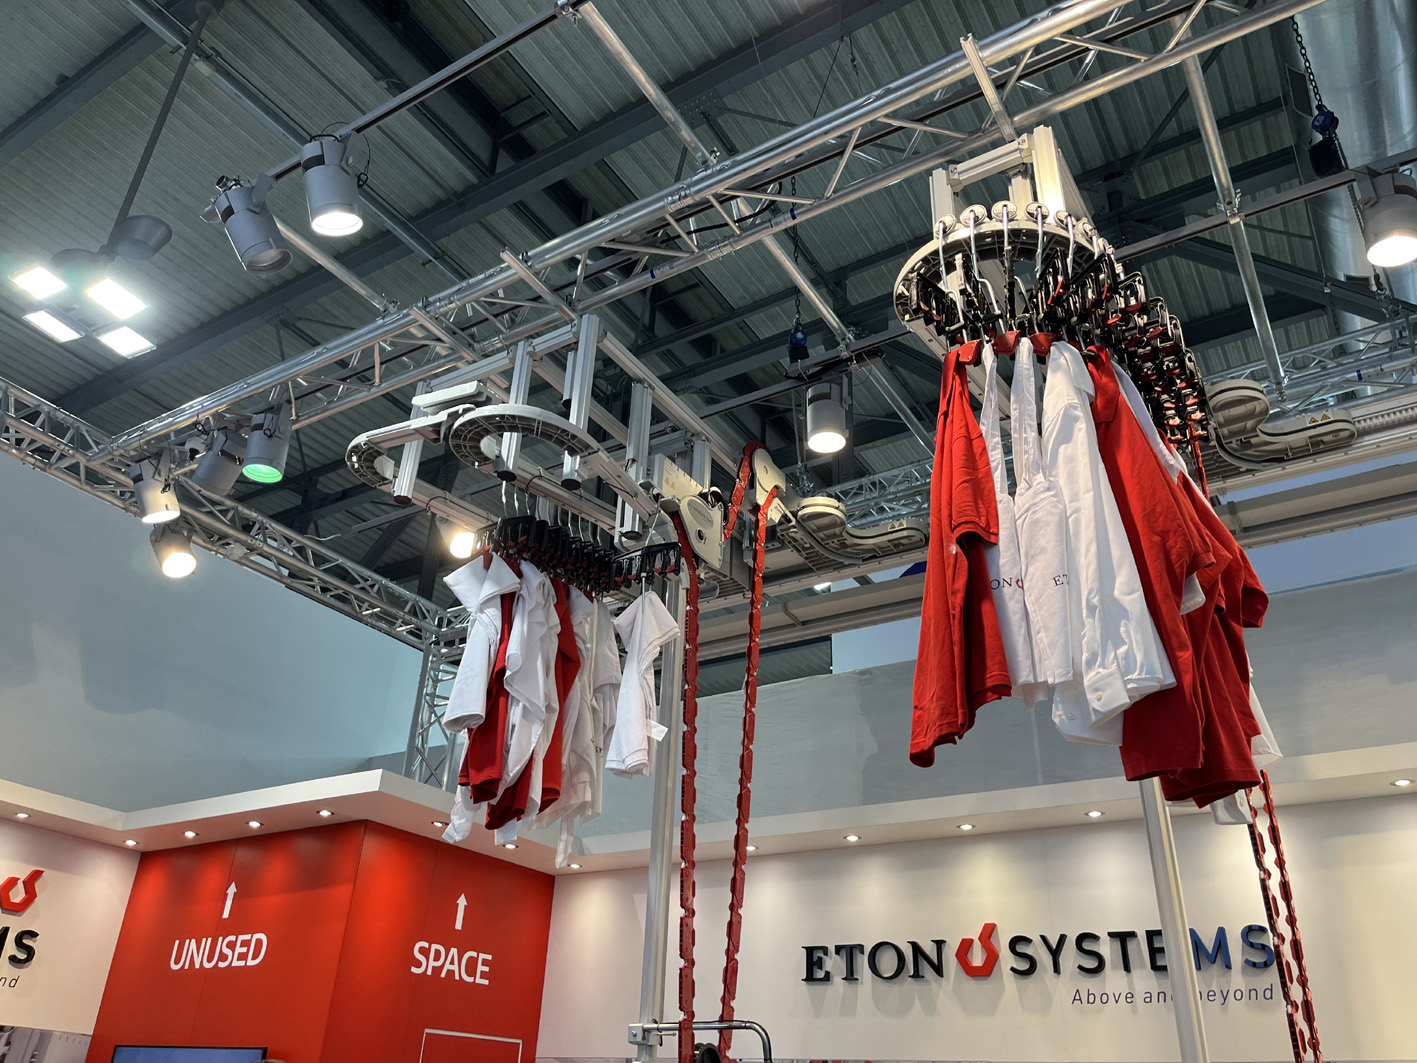 Eton Systems overhead garment automation demonstrated at the show. © Eton Systems